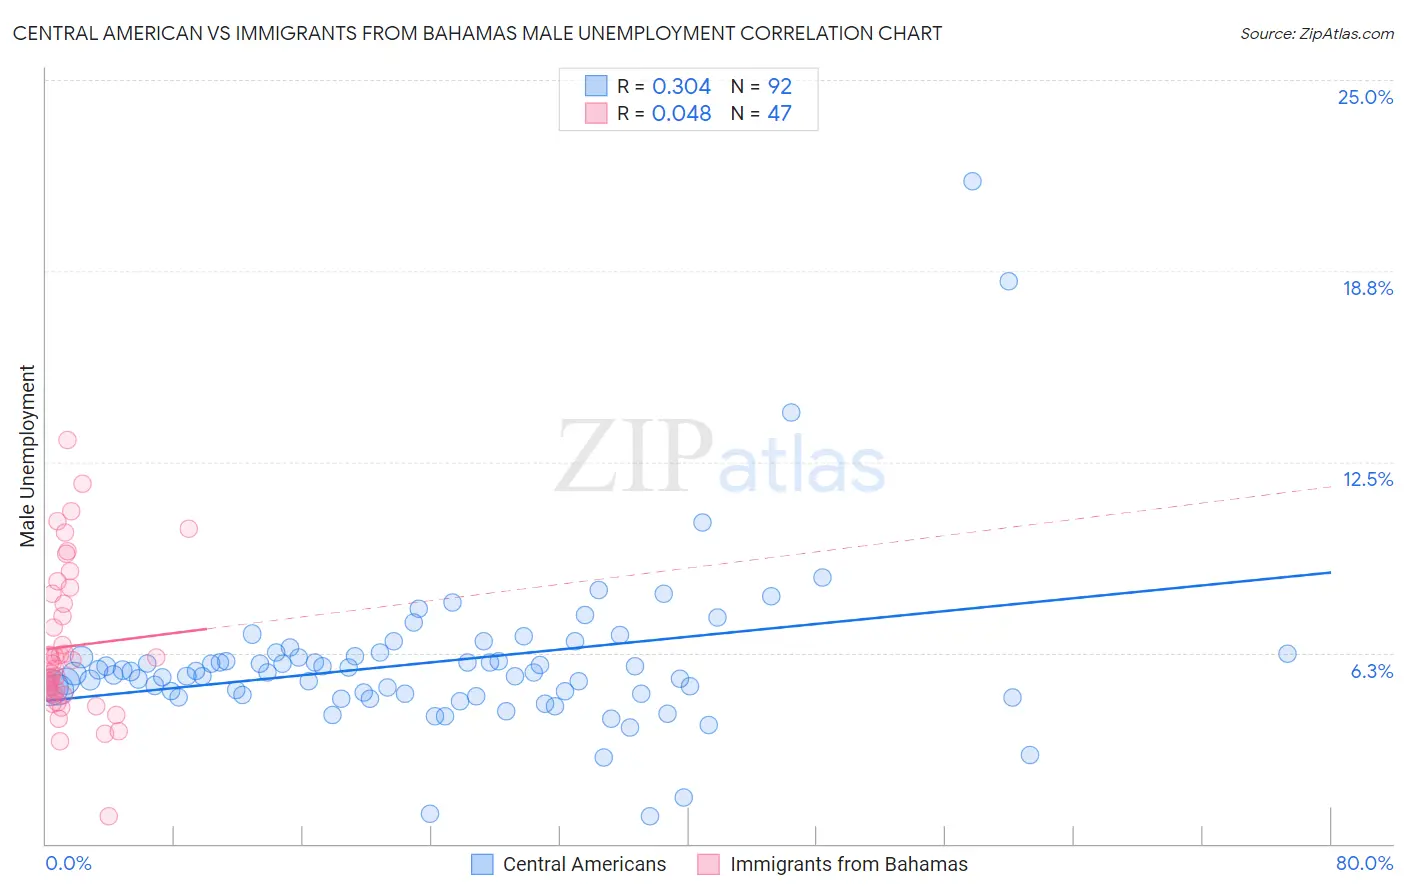 Central American vs Immigrants from Bahamas Male Unemployment